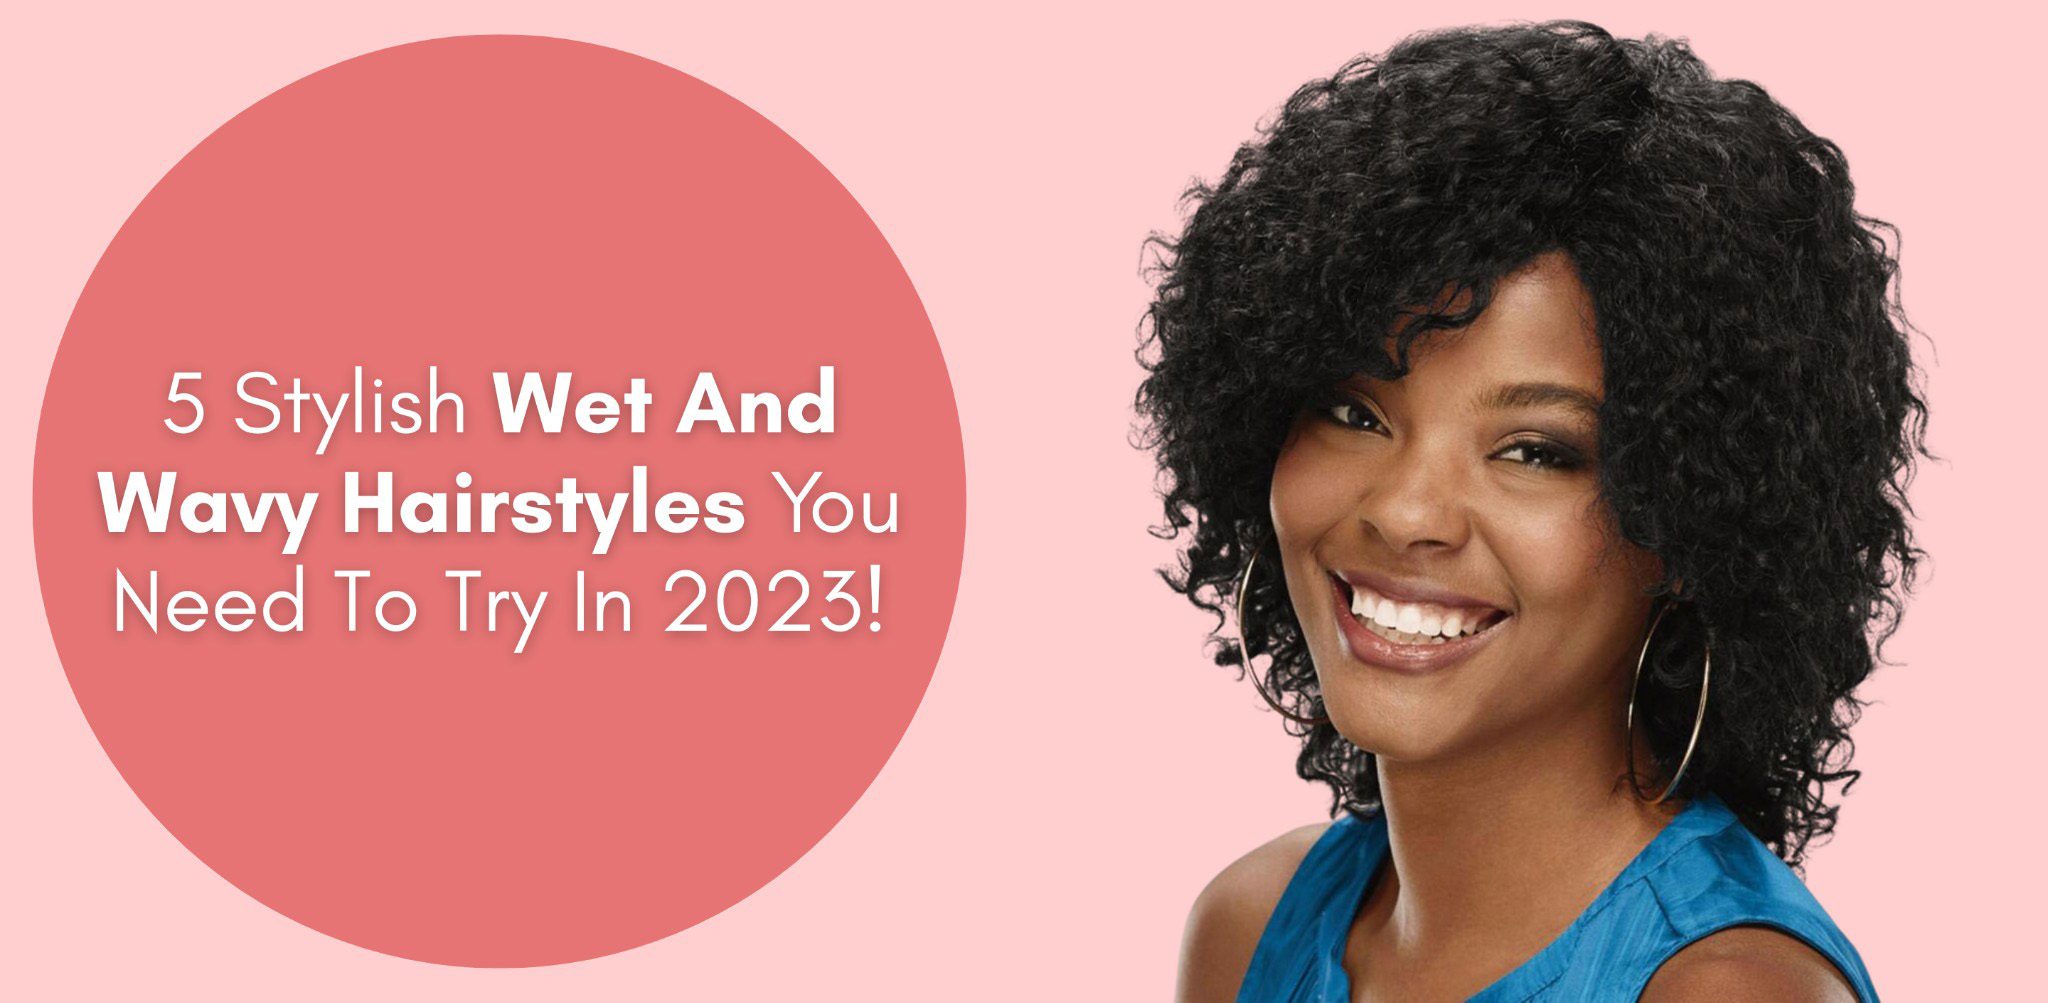 Curly hair wet or dry? - follow us @reshinehairbeauty for  more#hairinspiration visit:www.reshinehair.com save$$$$ off by enter code  